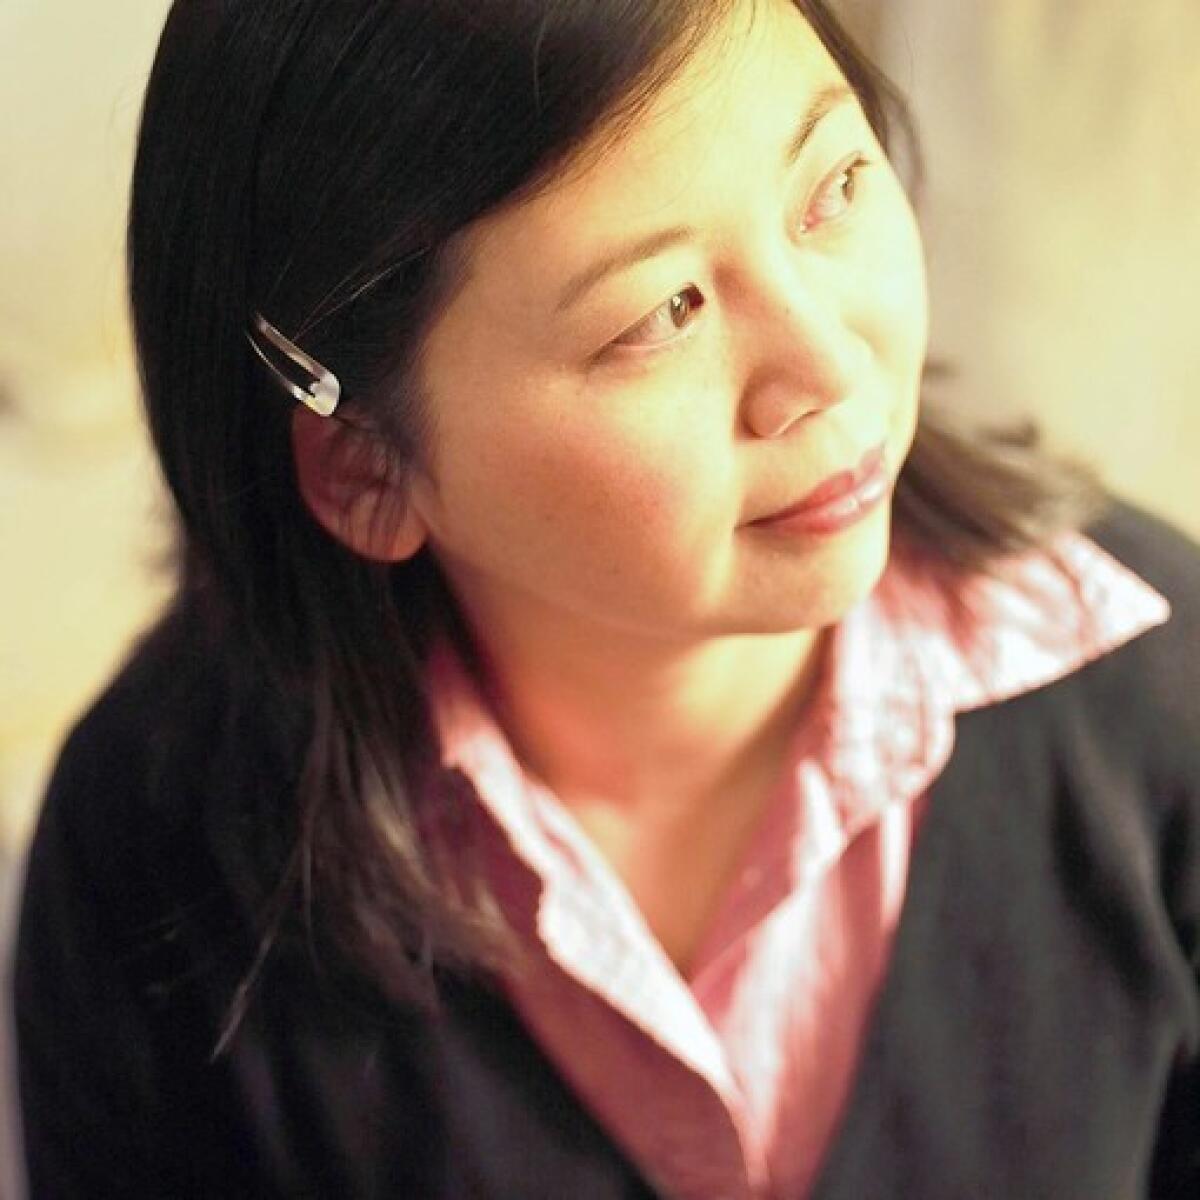 Says Yiyun Li of the characters in her book "The Vagrants," "I don't want to make them victims of the times."